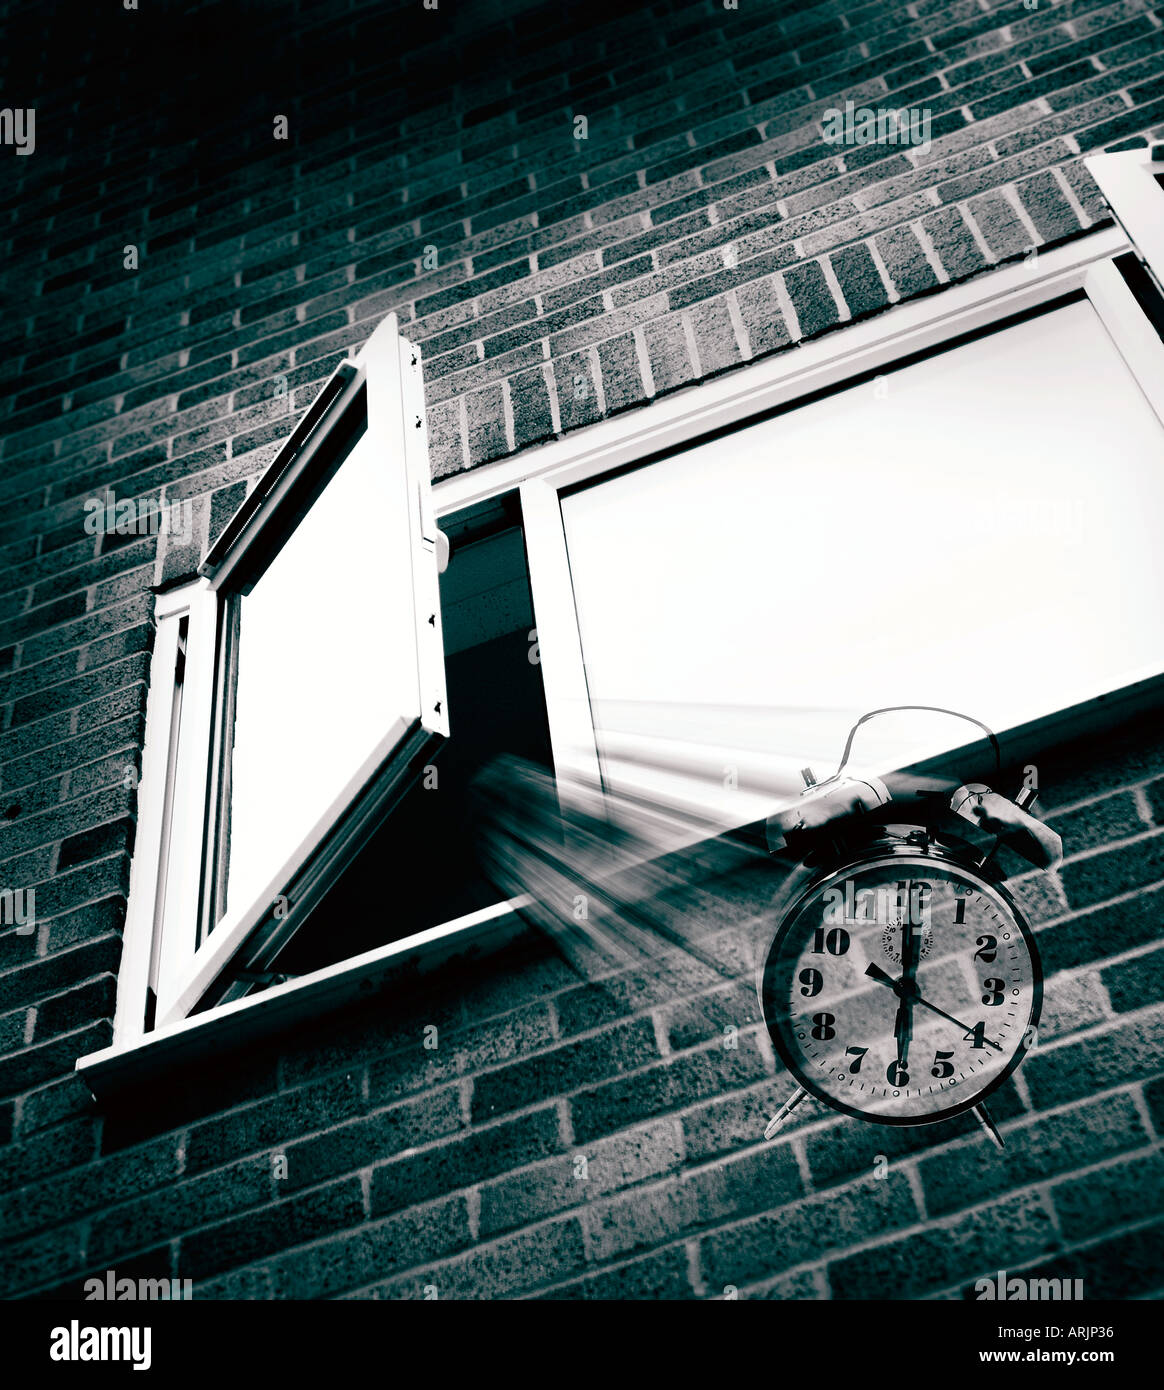 Alarm clock being thrown out of a bedroom window Stock Photo